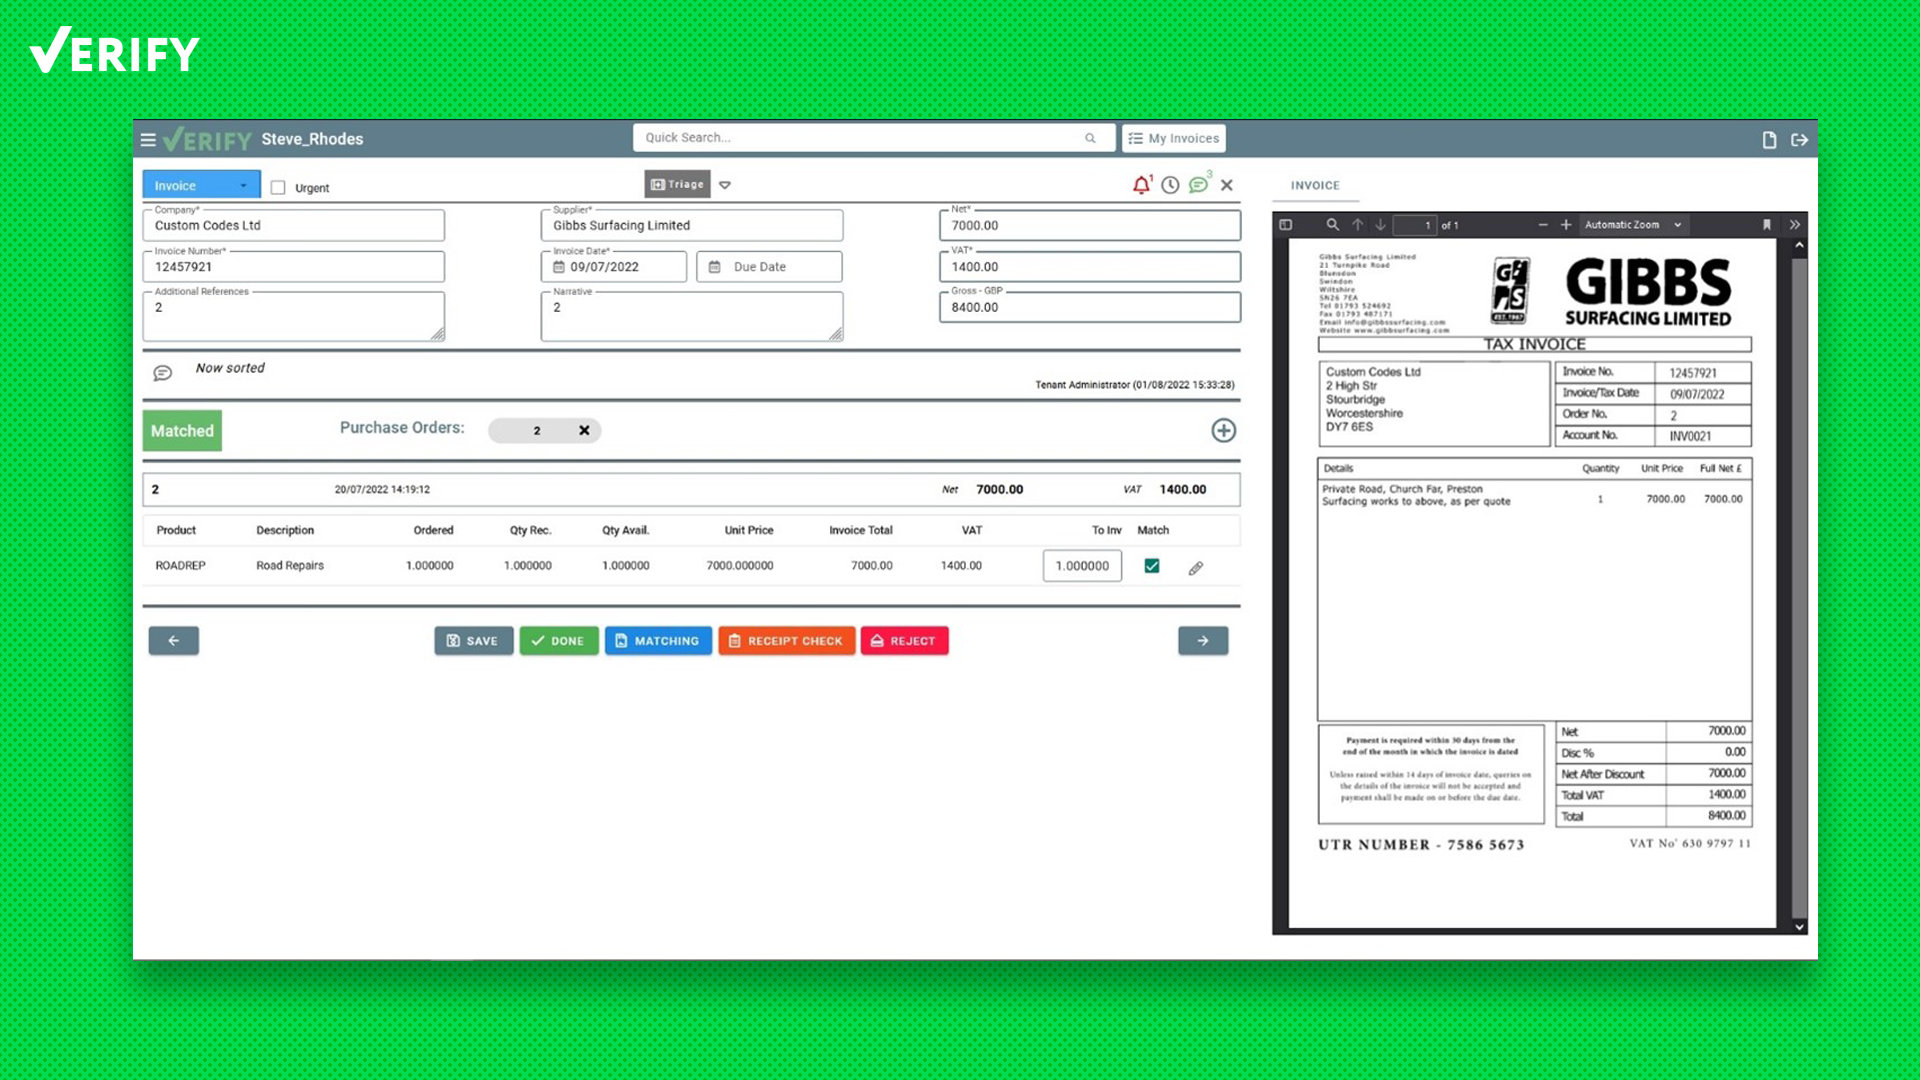 If a Purchase Order is available, Verify automatically matches the invoice to the related PO. It is then automatically posted to your finance system.